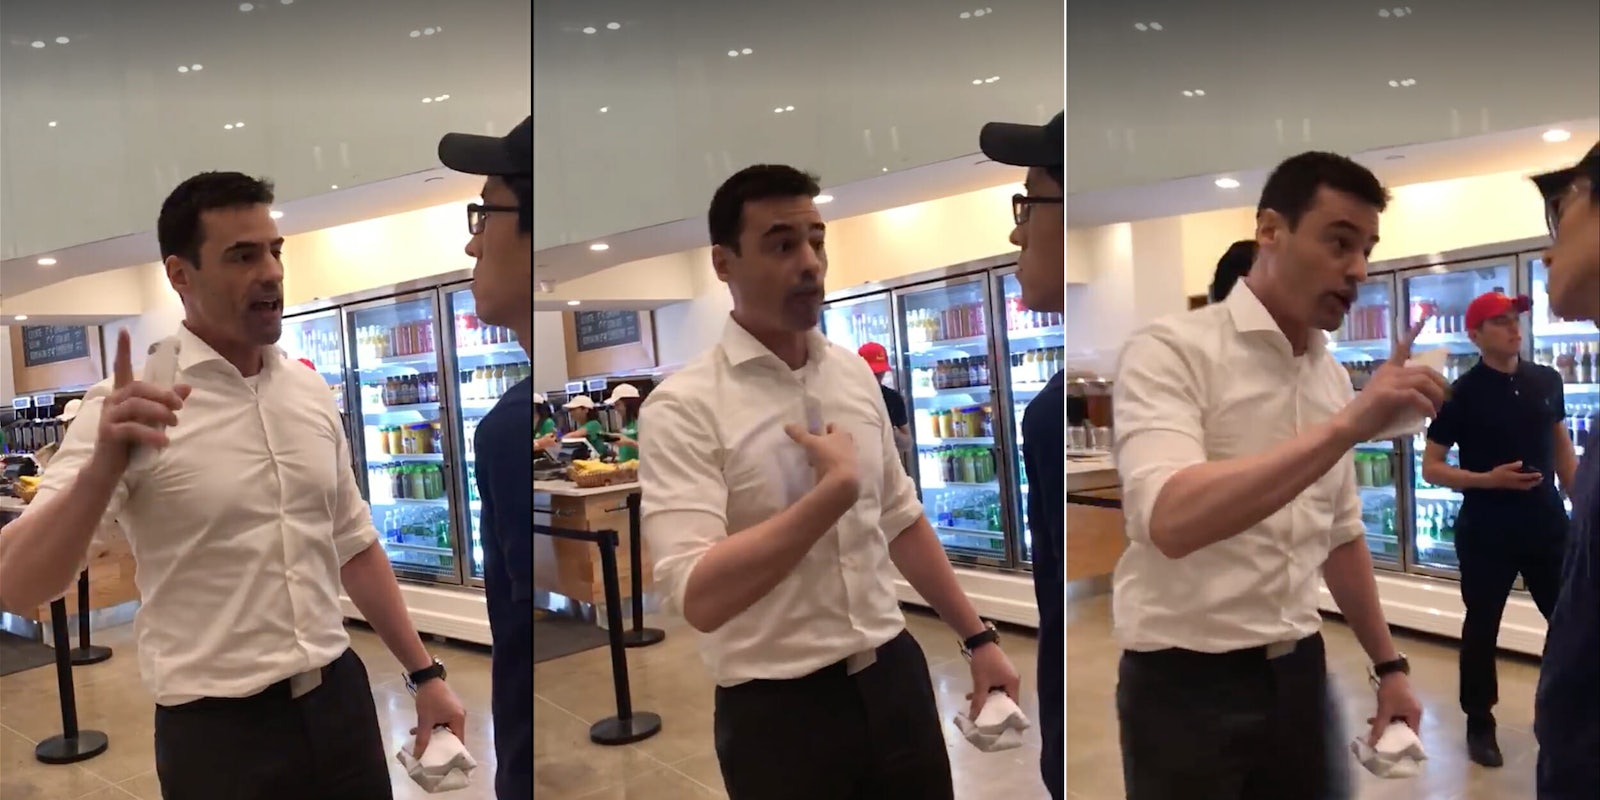 New York lawyer Aaron Schlossberg was filmed going off on a racist tirade at a Fresh Kitchen.